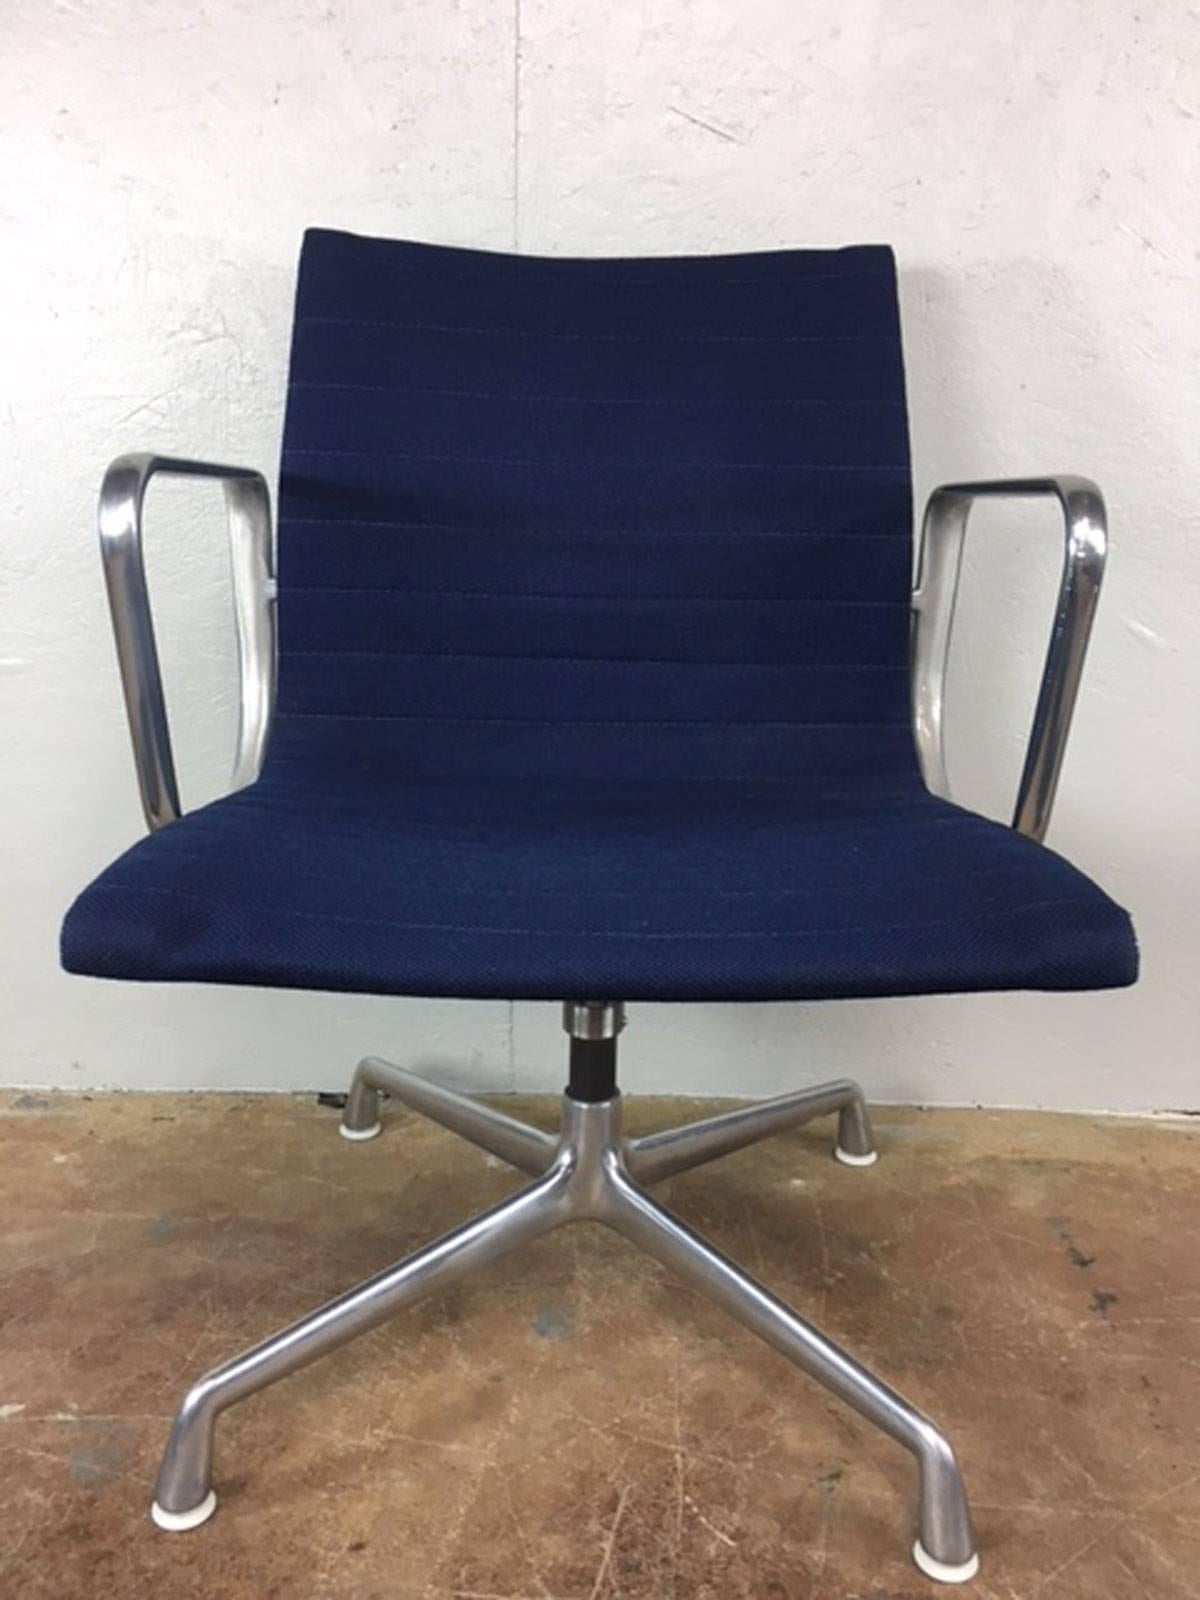 American Charles Eames Aluminum Group Management Chair by Herman Miller